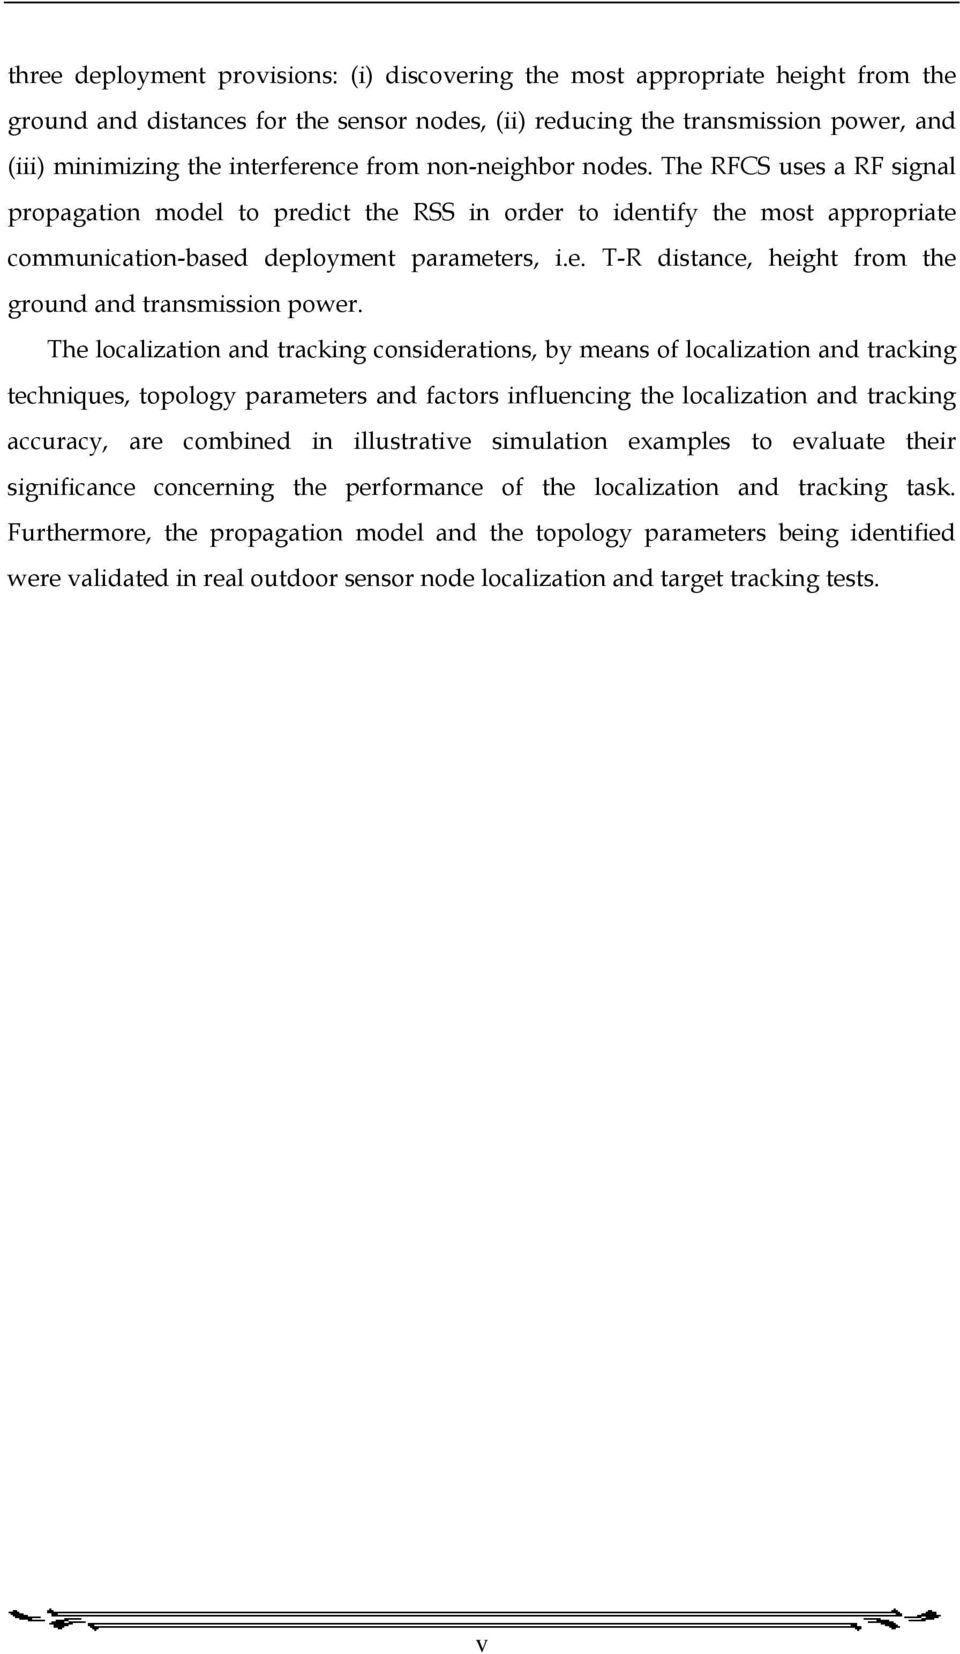 The localization and tracking considerations, by means of localization and tracking techniques, topology parameters and factors influencing the localization and tracking accuracy, are combined in